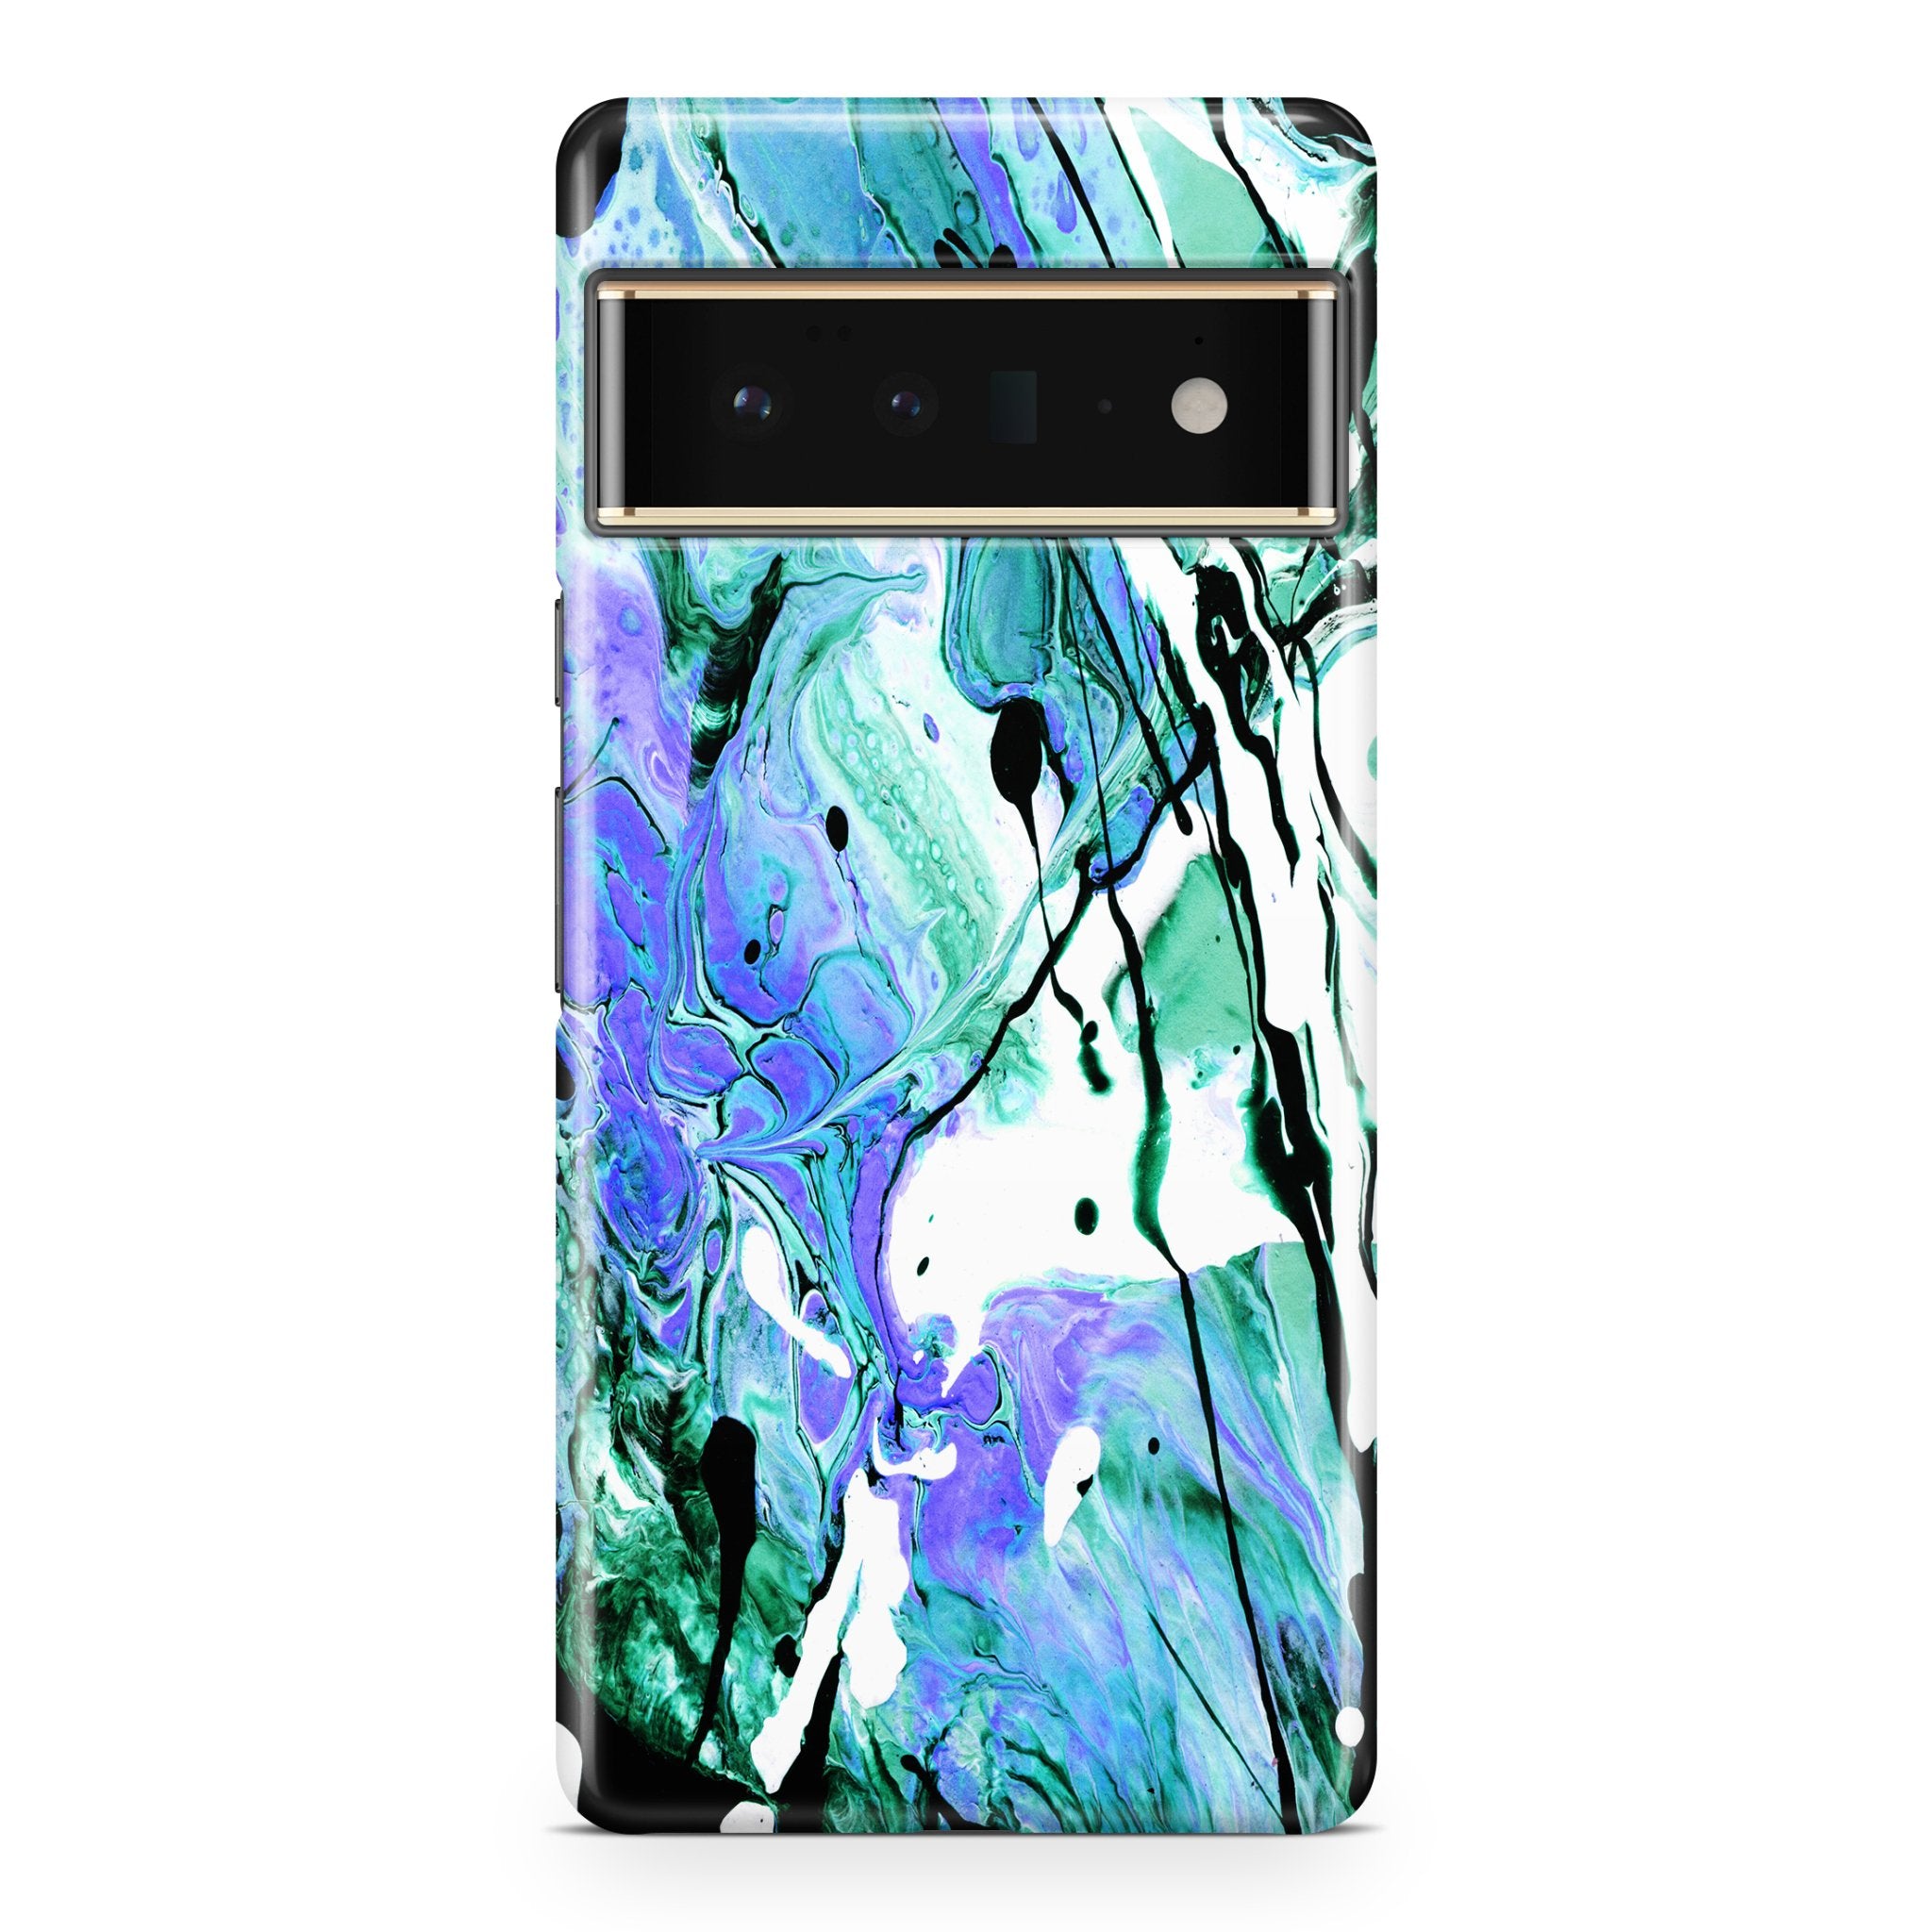 Blue Fluid Acrylic - Google phone case designs by CaseSwagger